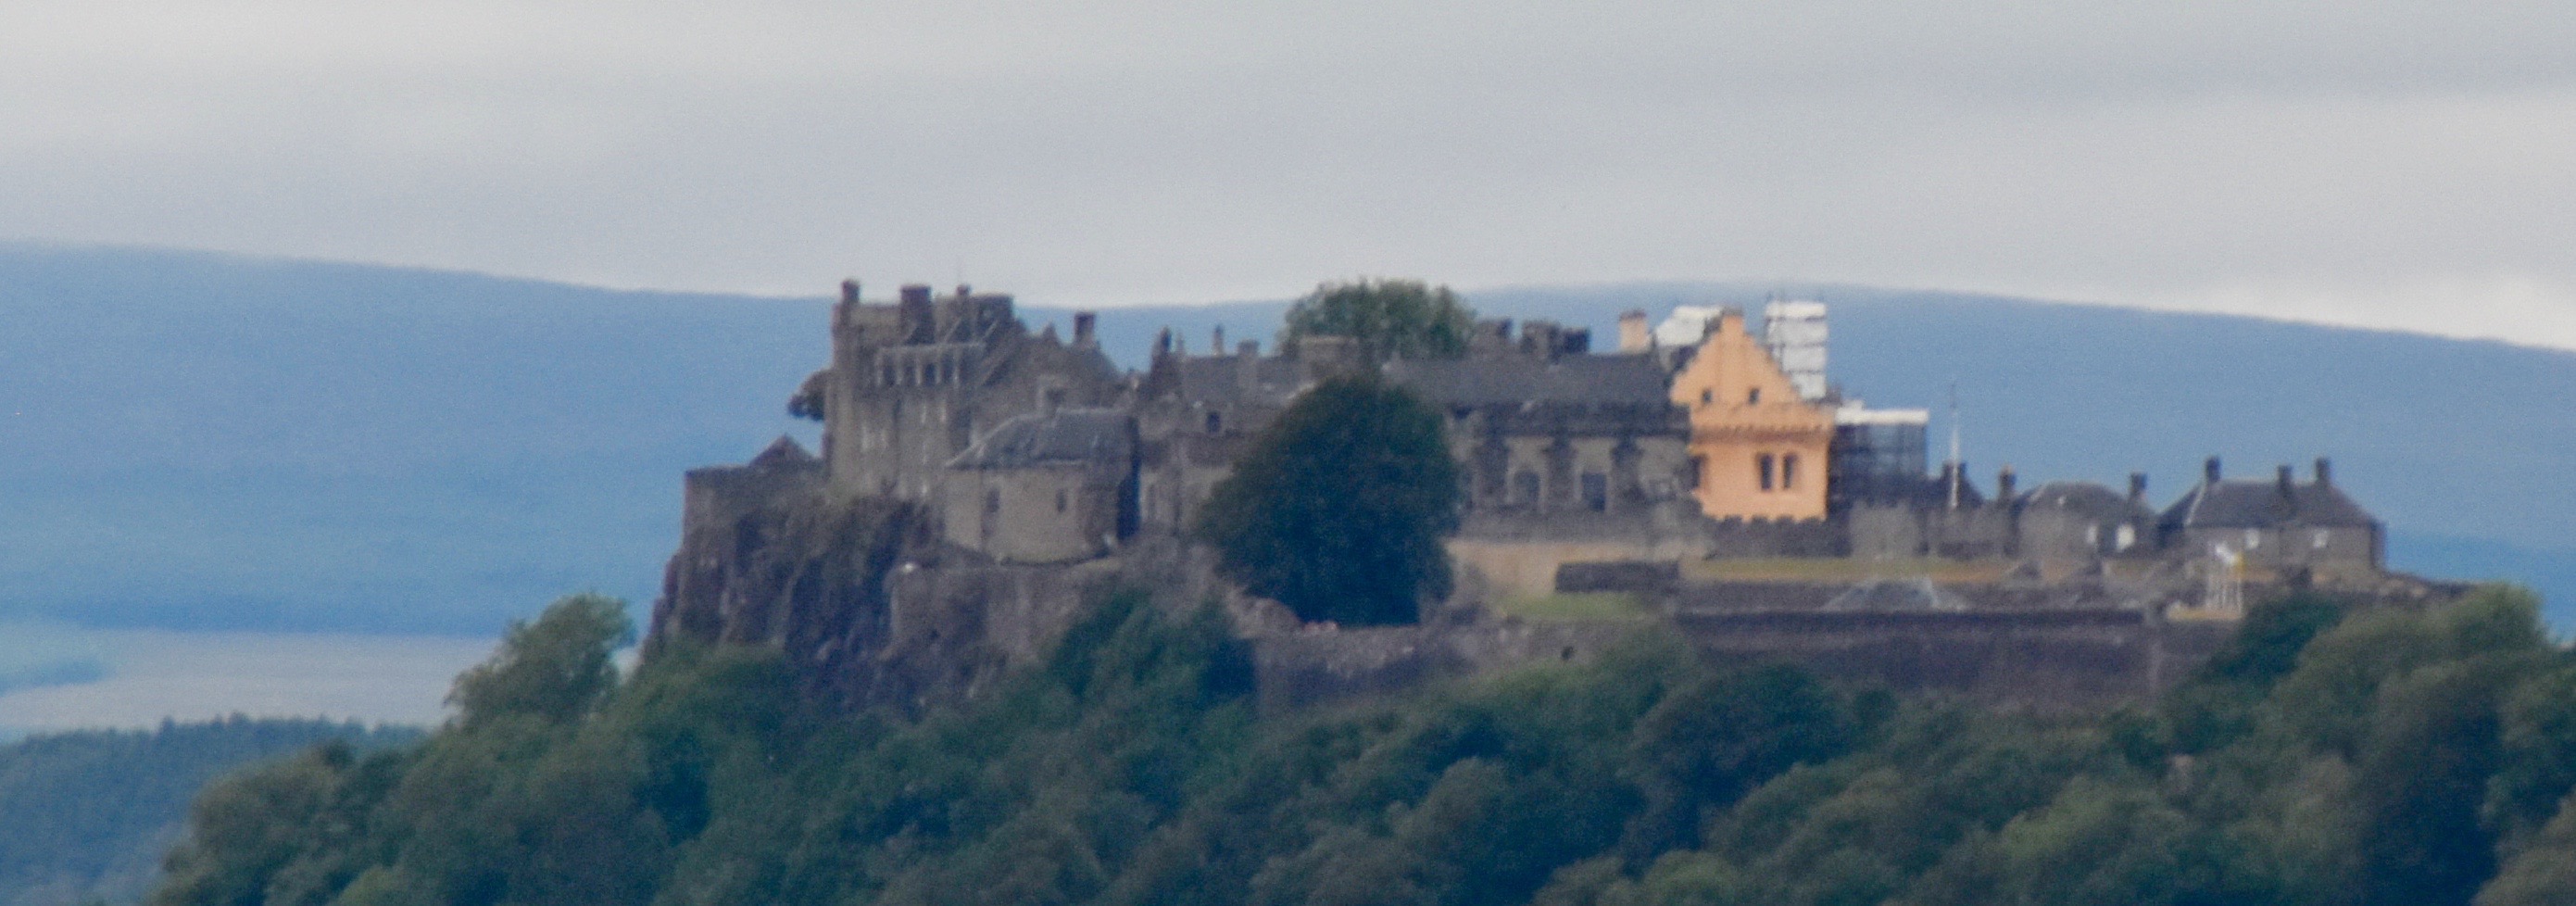 Photo of Stirling Castle